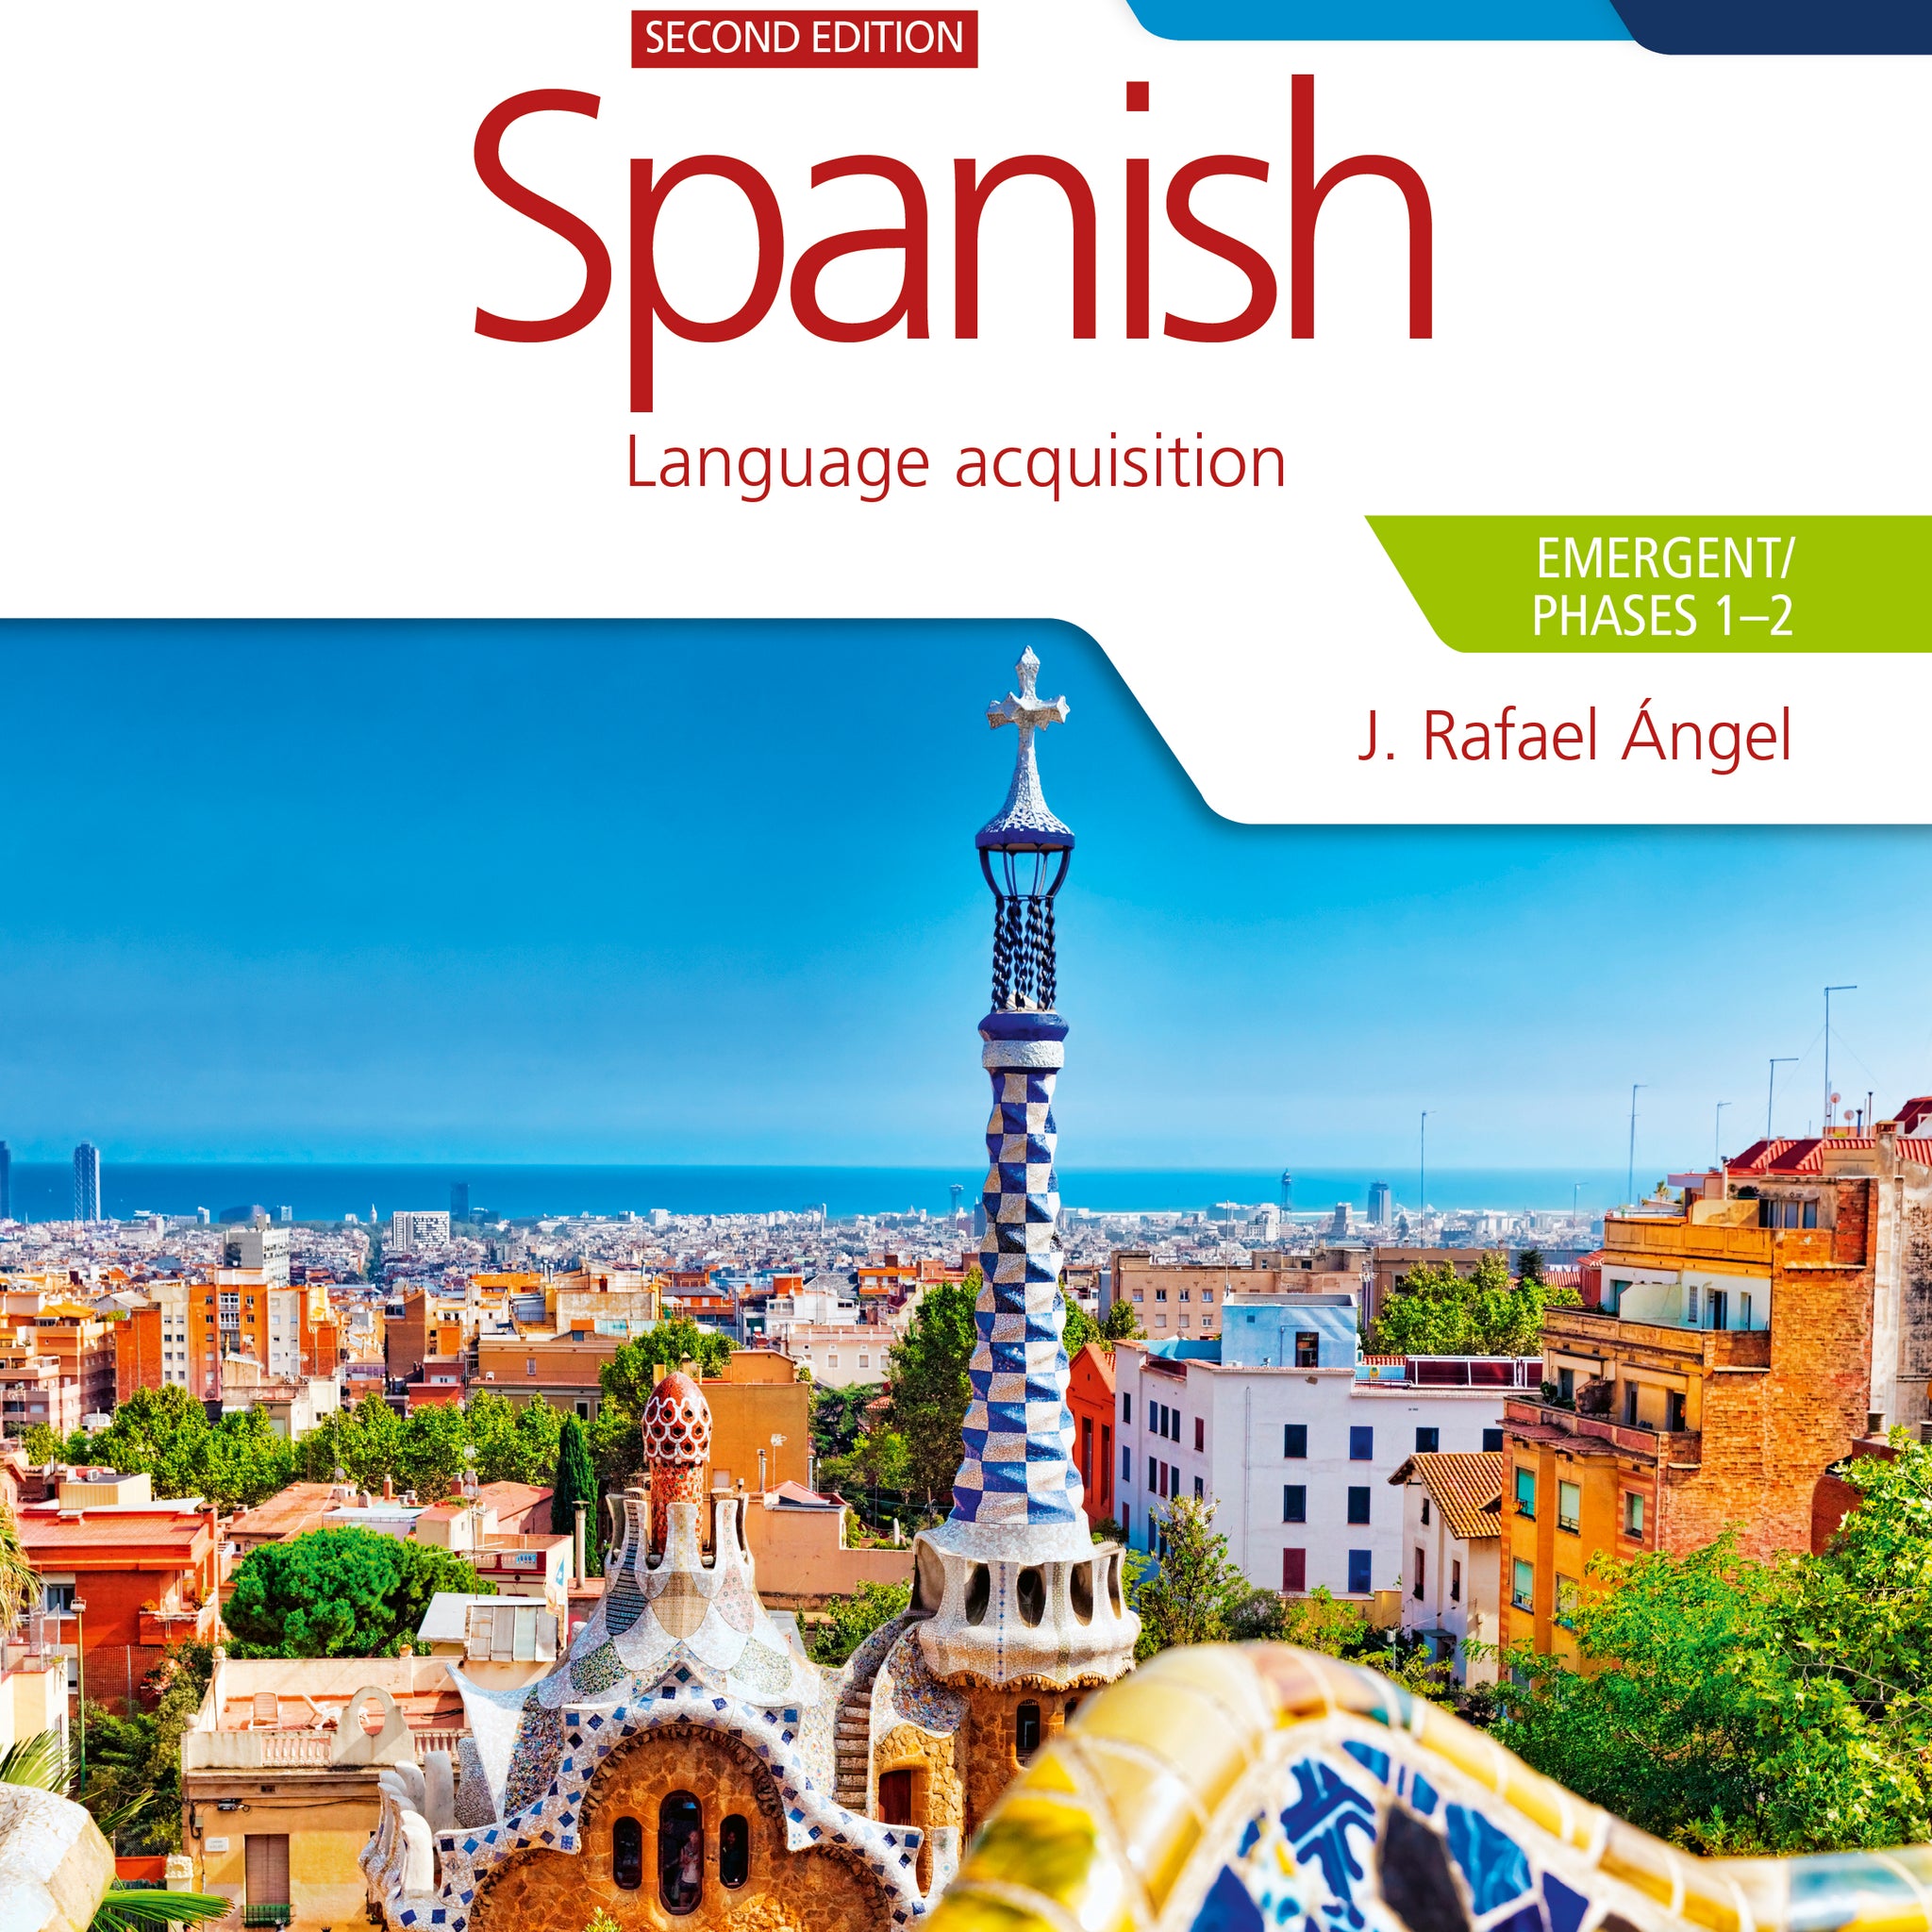 Spanish for the IB MYP 4&5 by Concept (Emergent/Phases 1-2) 2nd Edition